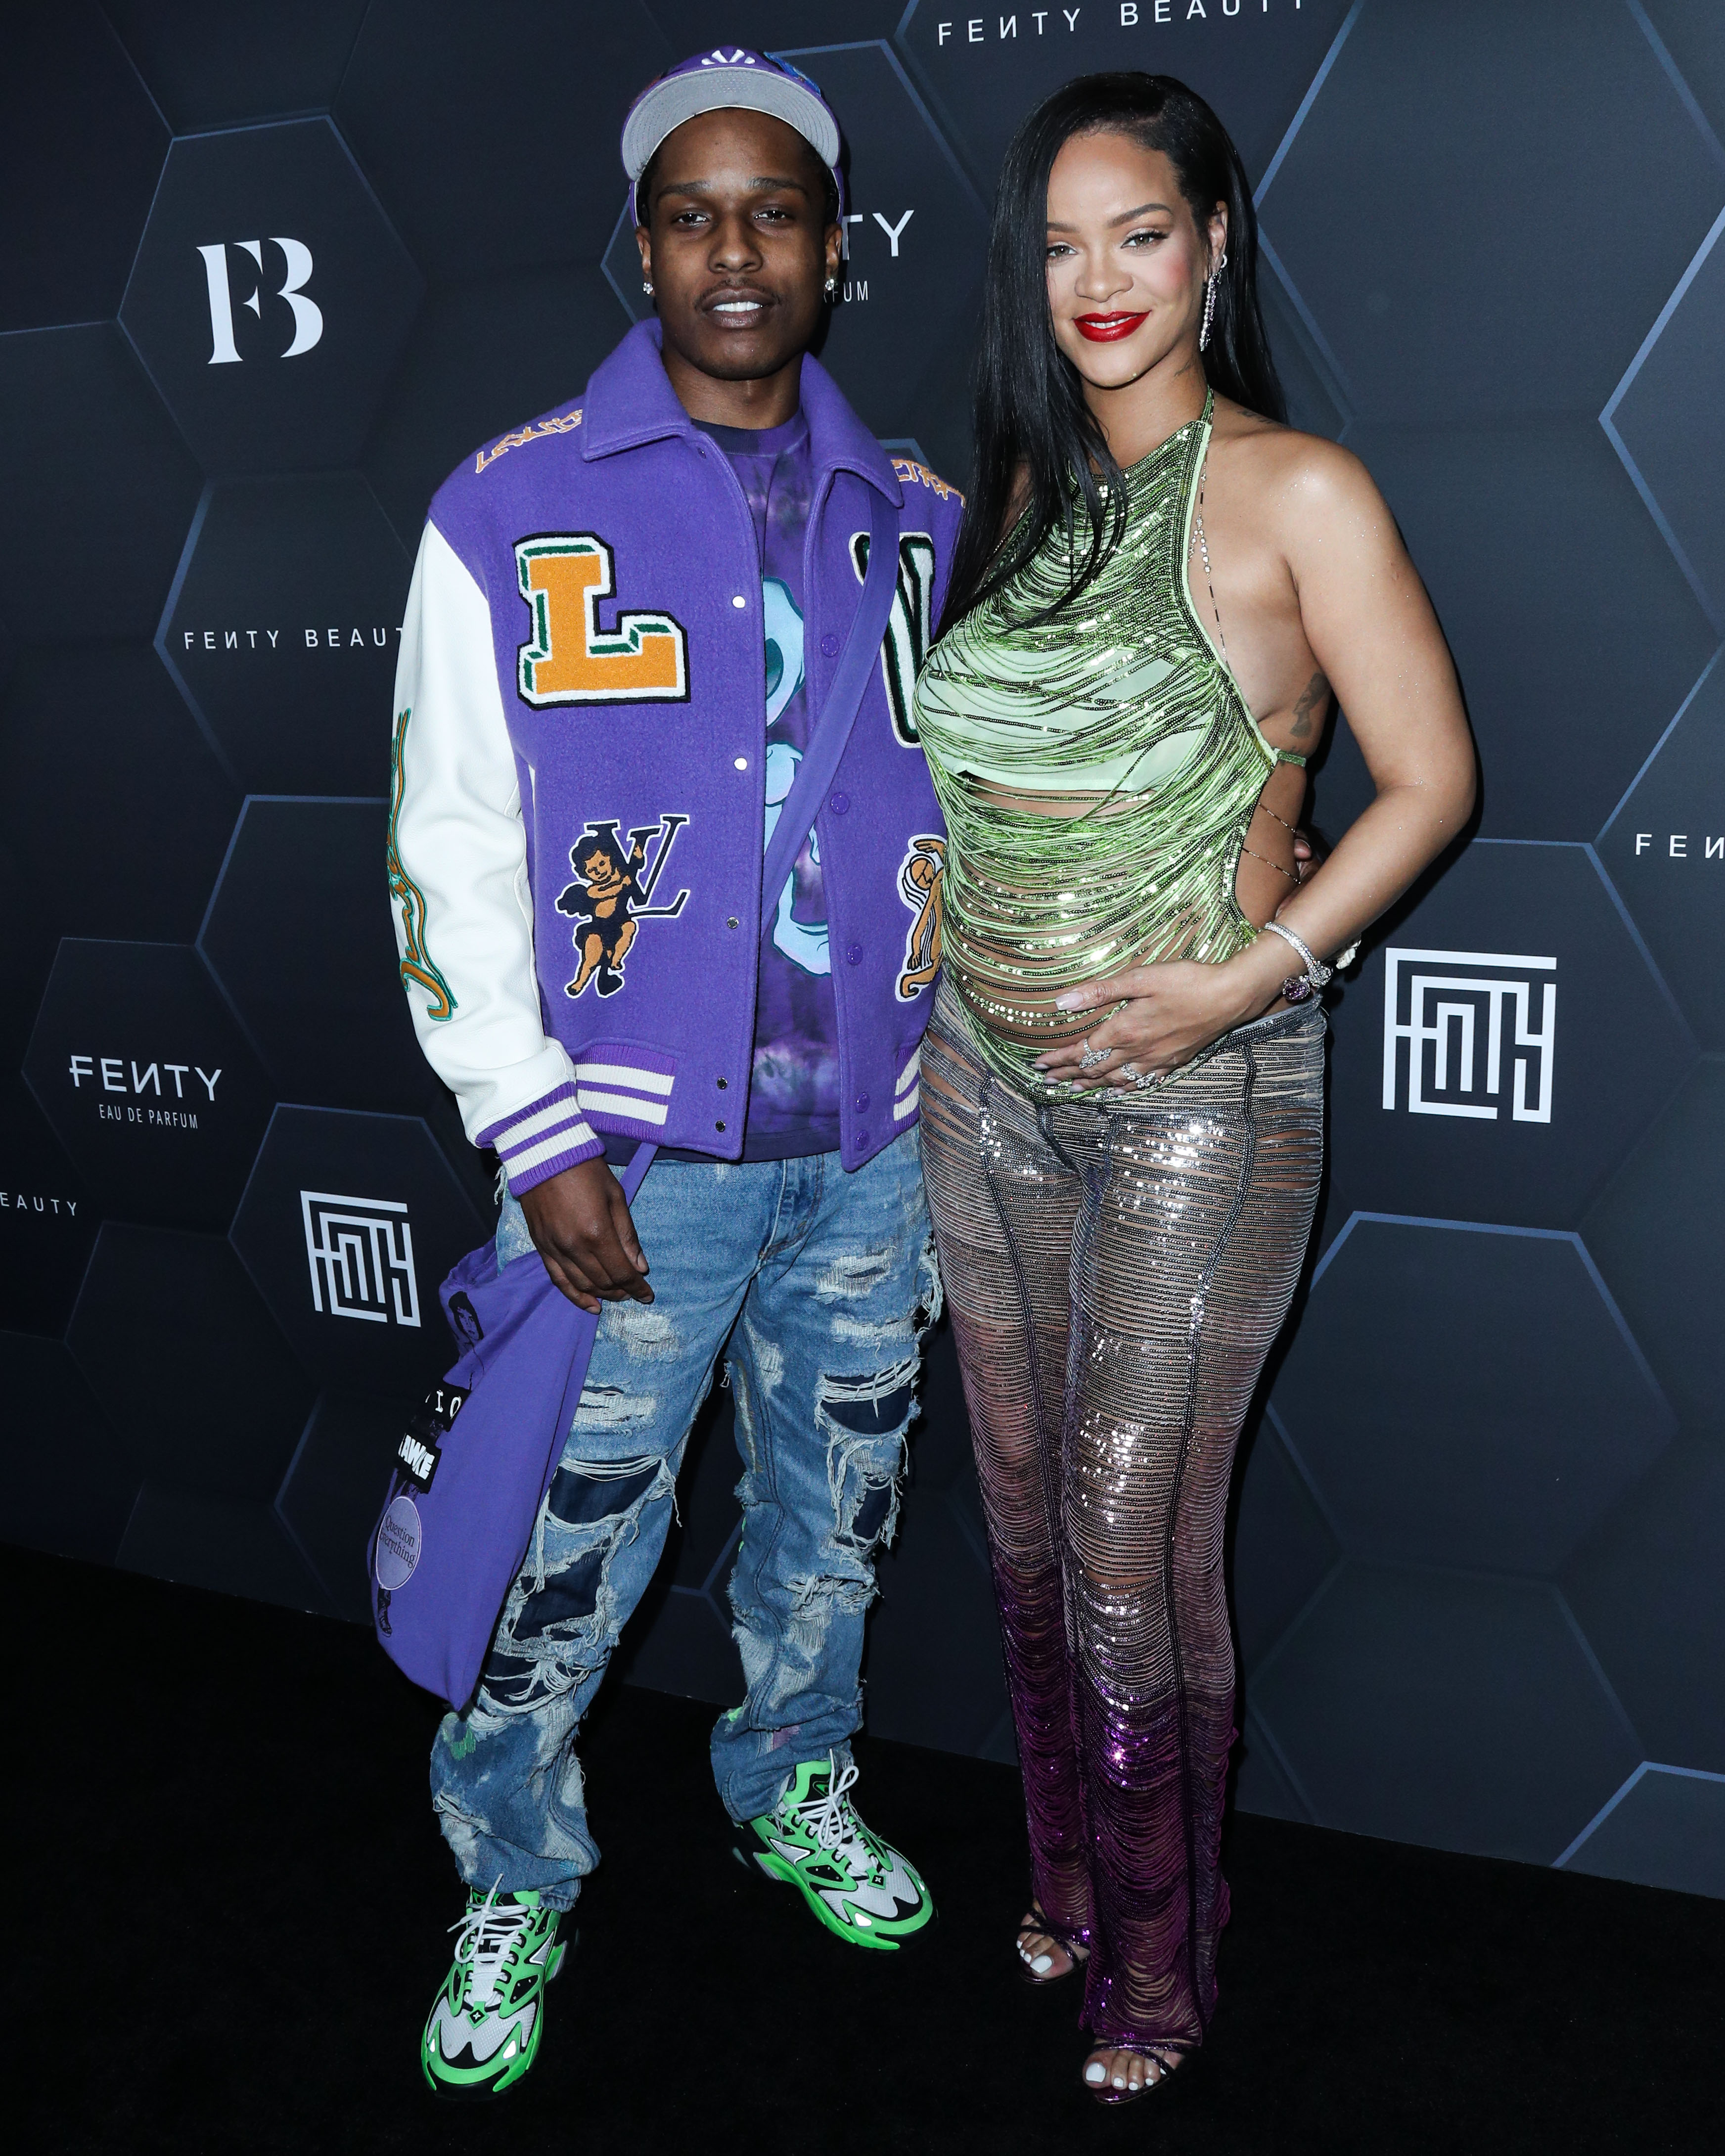 Here Are Rihanna and A$AP Rocky's Best Post-Pregnancy Announcement Fits